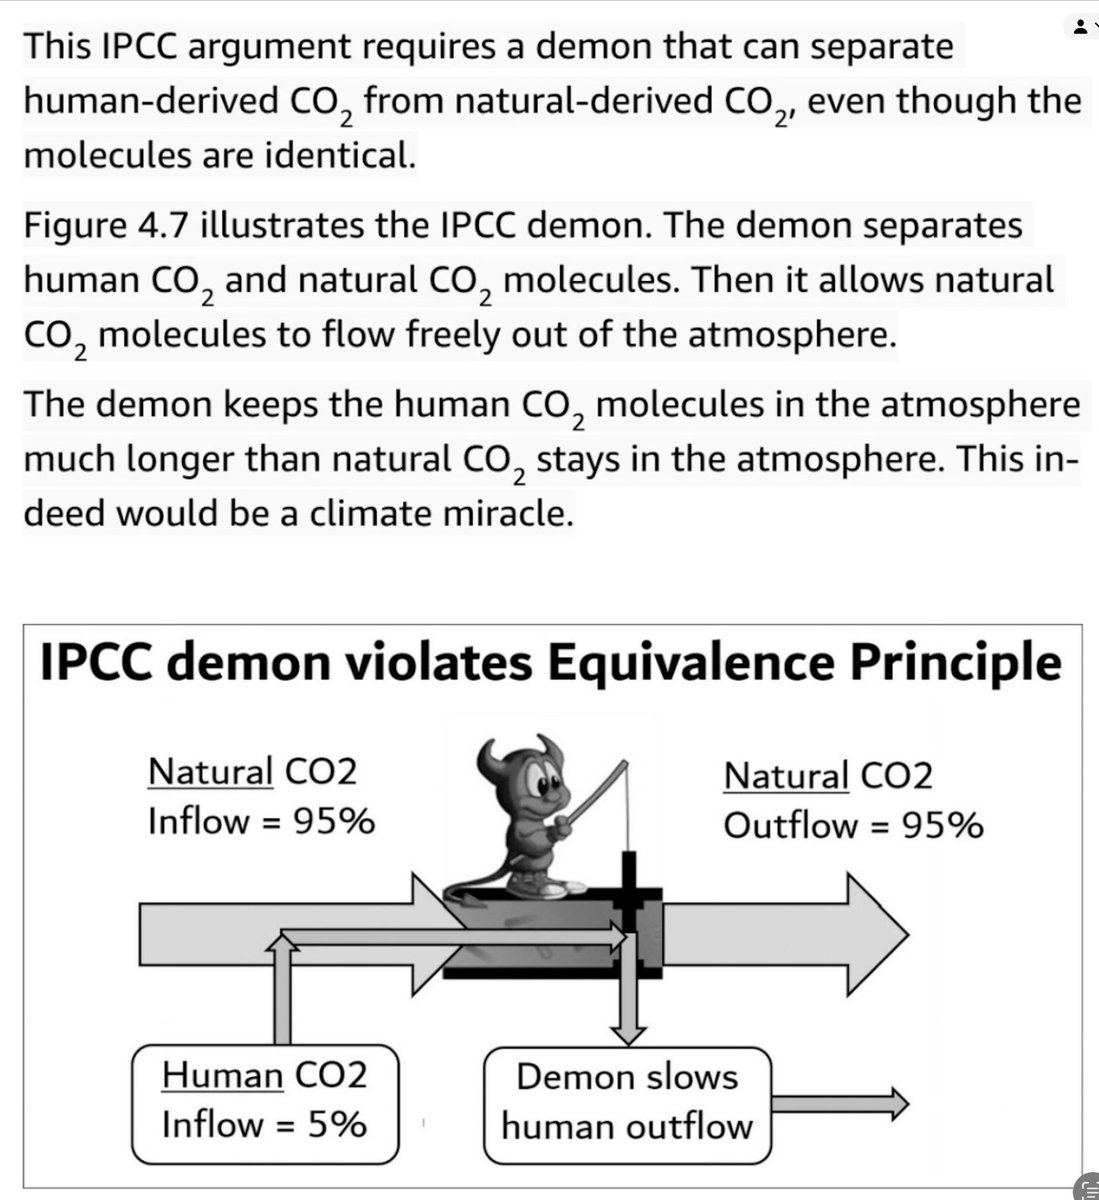 Dumb question? The IPCC claims that 95% of natural CO2 returns to surface sinks, but only 50% of fossil fuel emitted CO2 returns to the surface? That’s how they calculate the fossil fuel warming effect.